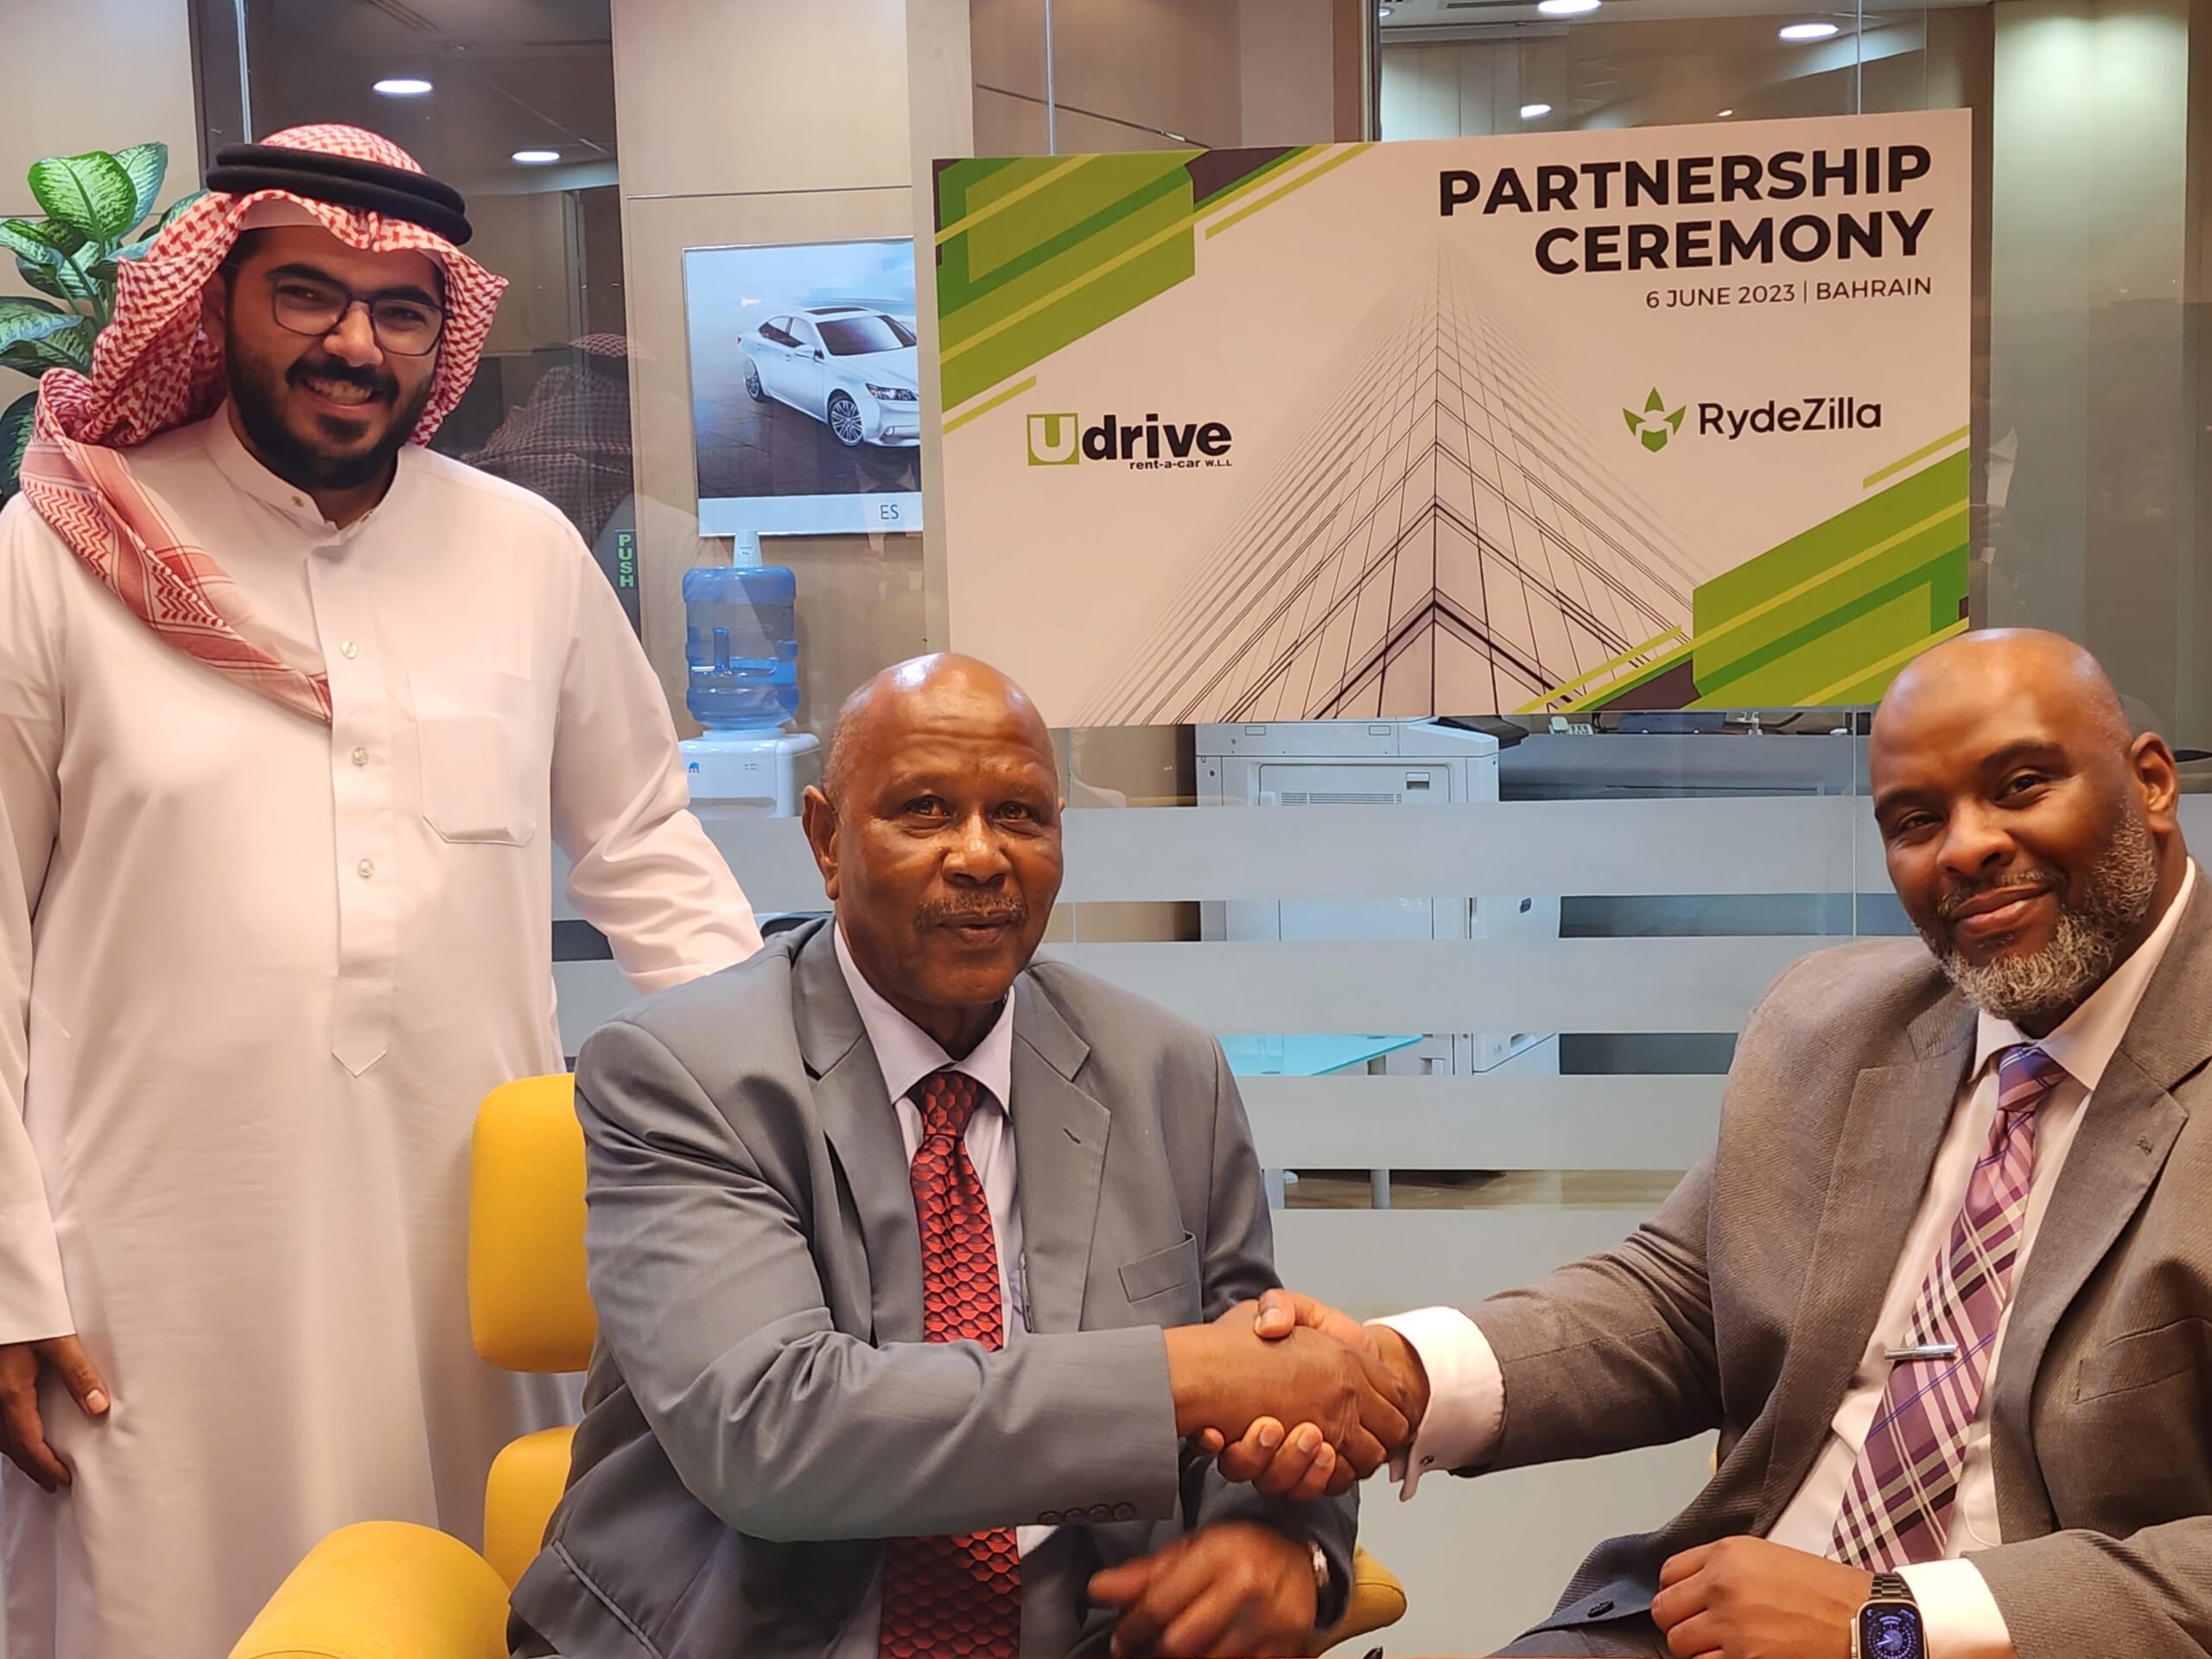 Rydezilla Partners with Udrive Bahrain to Redefine Car Rental Experience